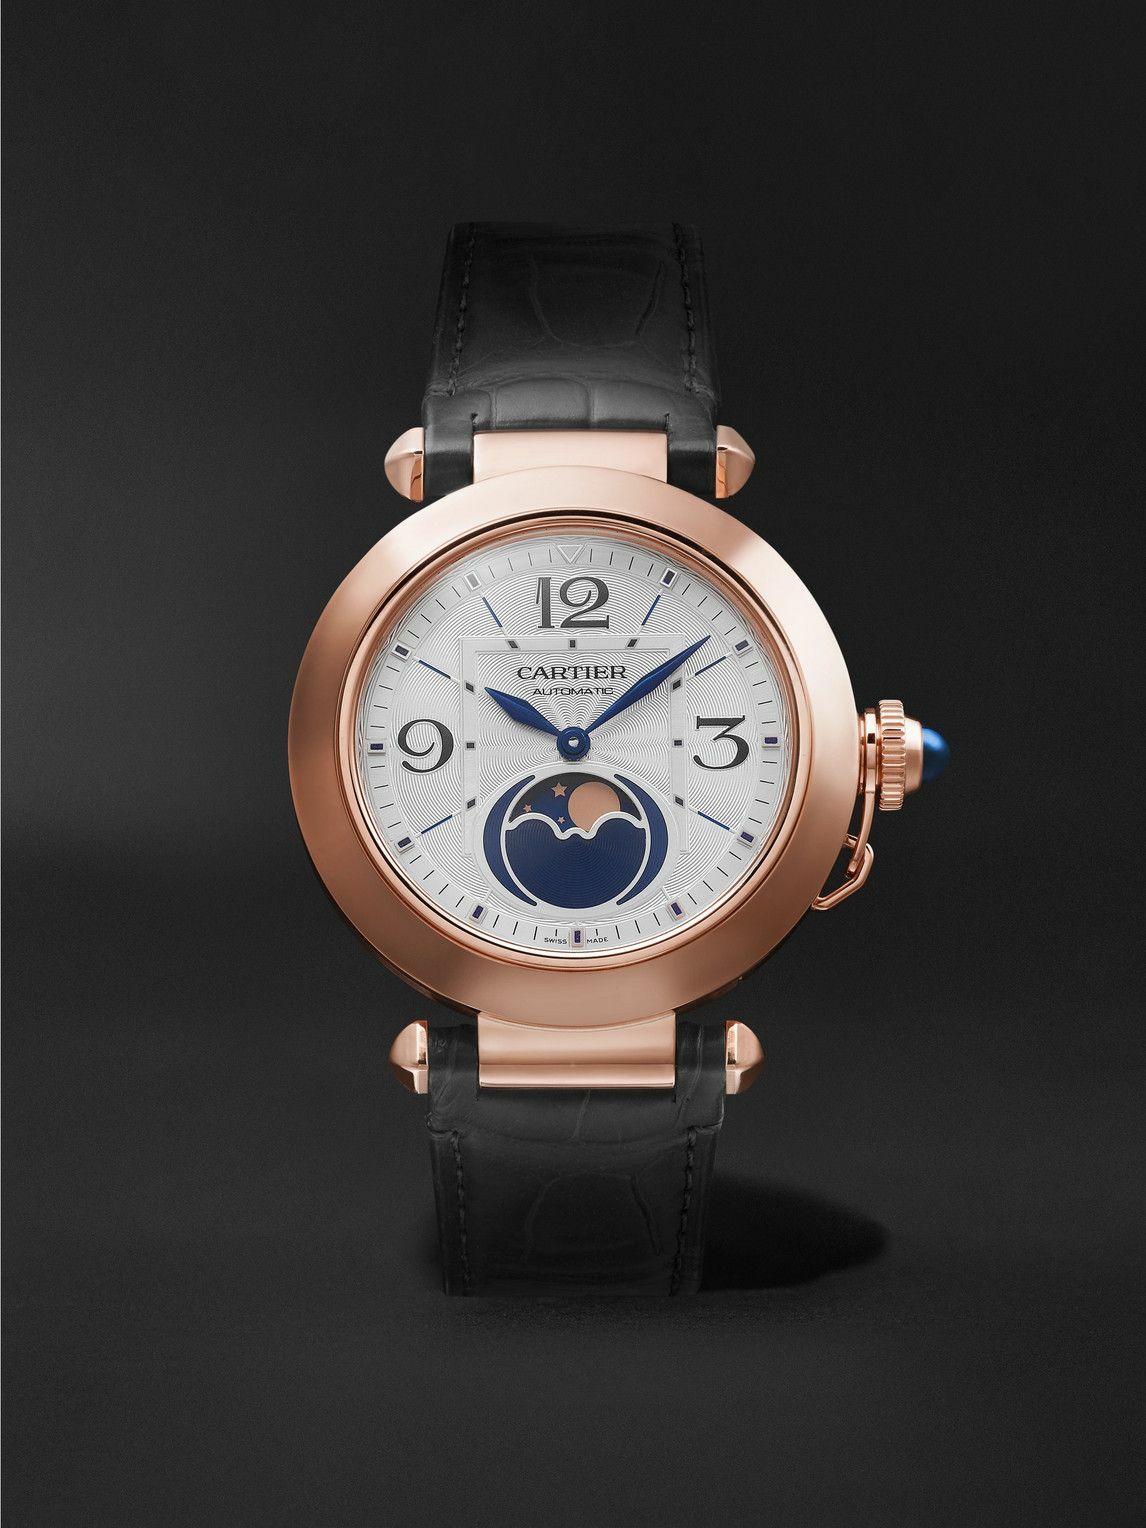 Photo: Cartier - Pasha de Cartier Automatic Moon-Phase 41mm 18-Karat Rose Gold and Alligator Watch, Ref. No. WGPA0026